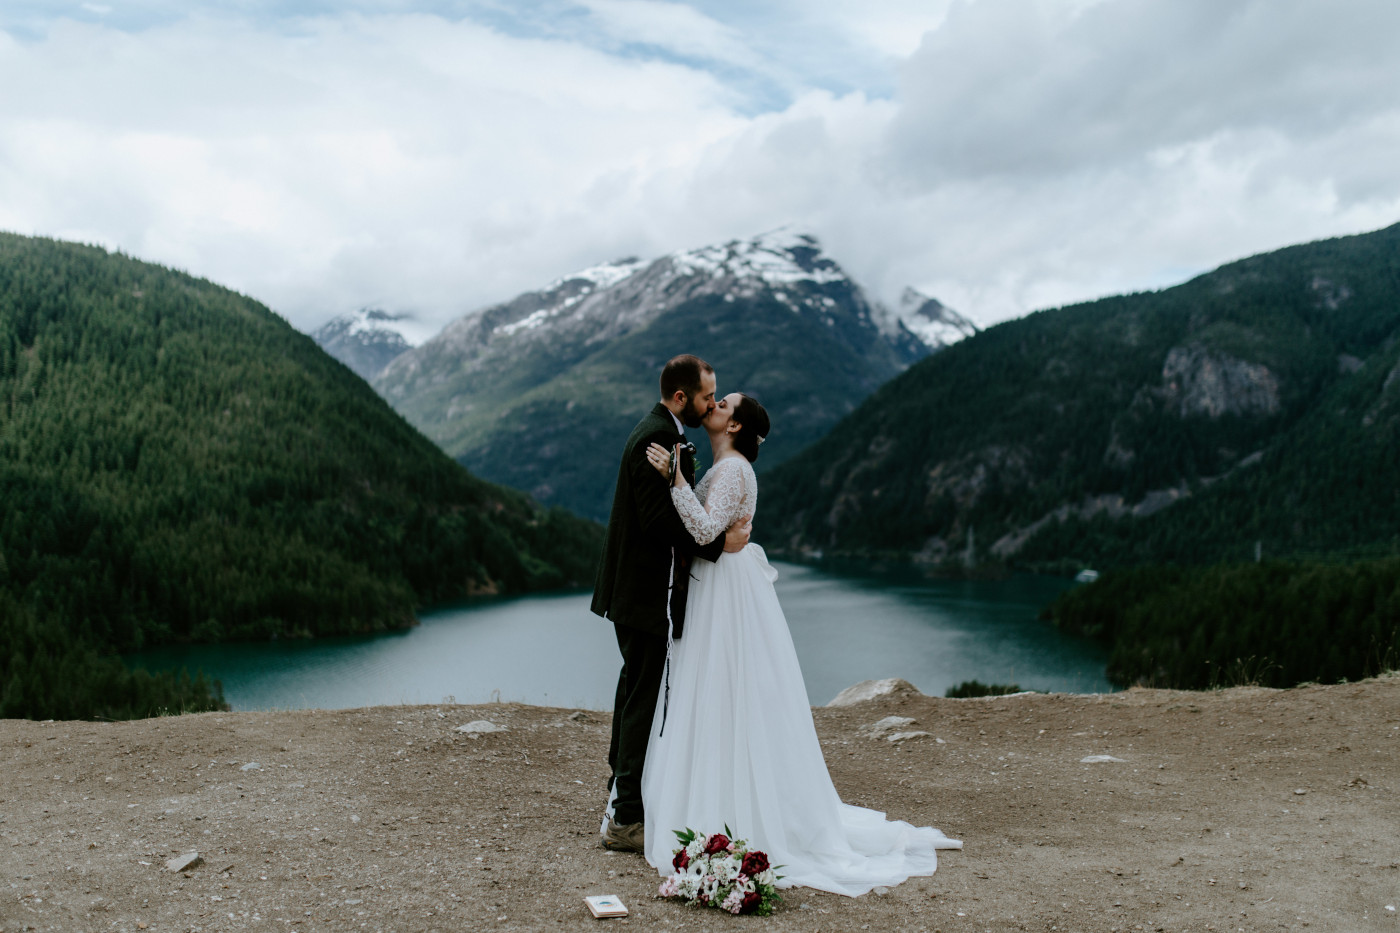 Elizabeth and Alex kiss with a view of Diablo Lake Overlook. Elopement photography at North Cascades National Park by Sienna Plus Josh.